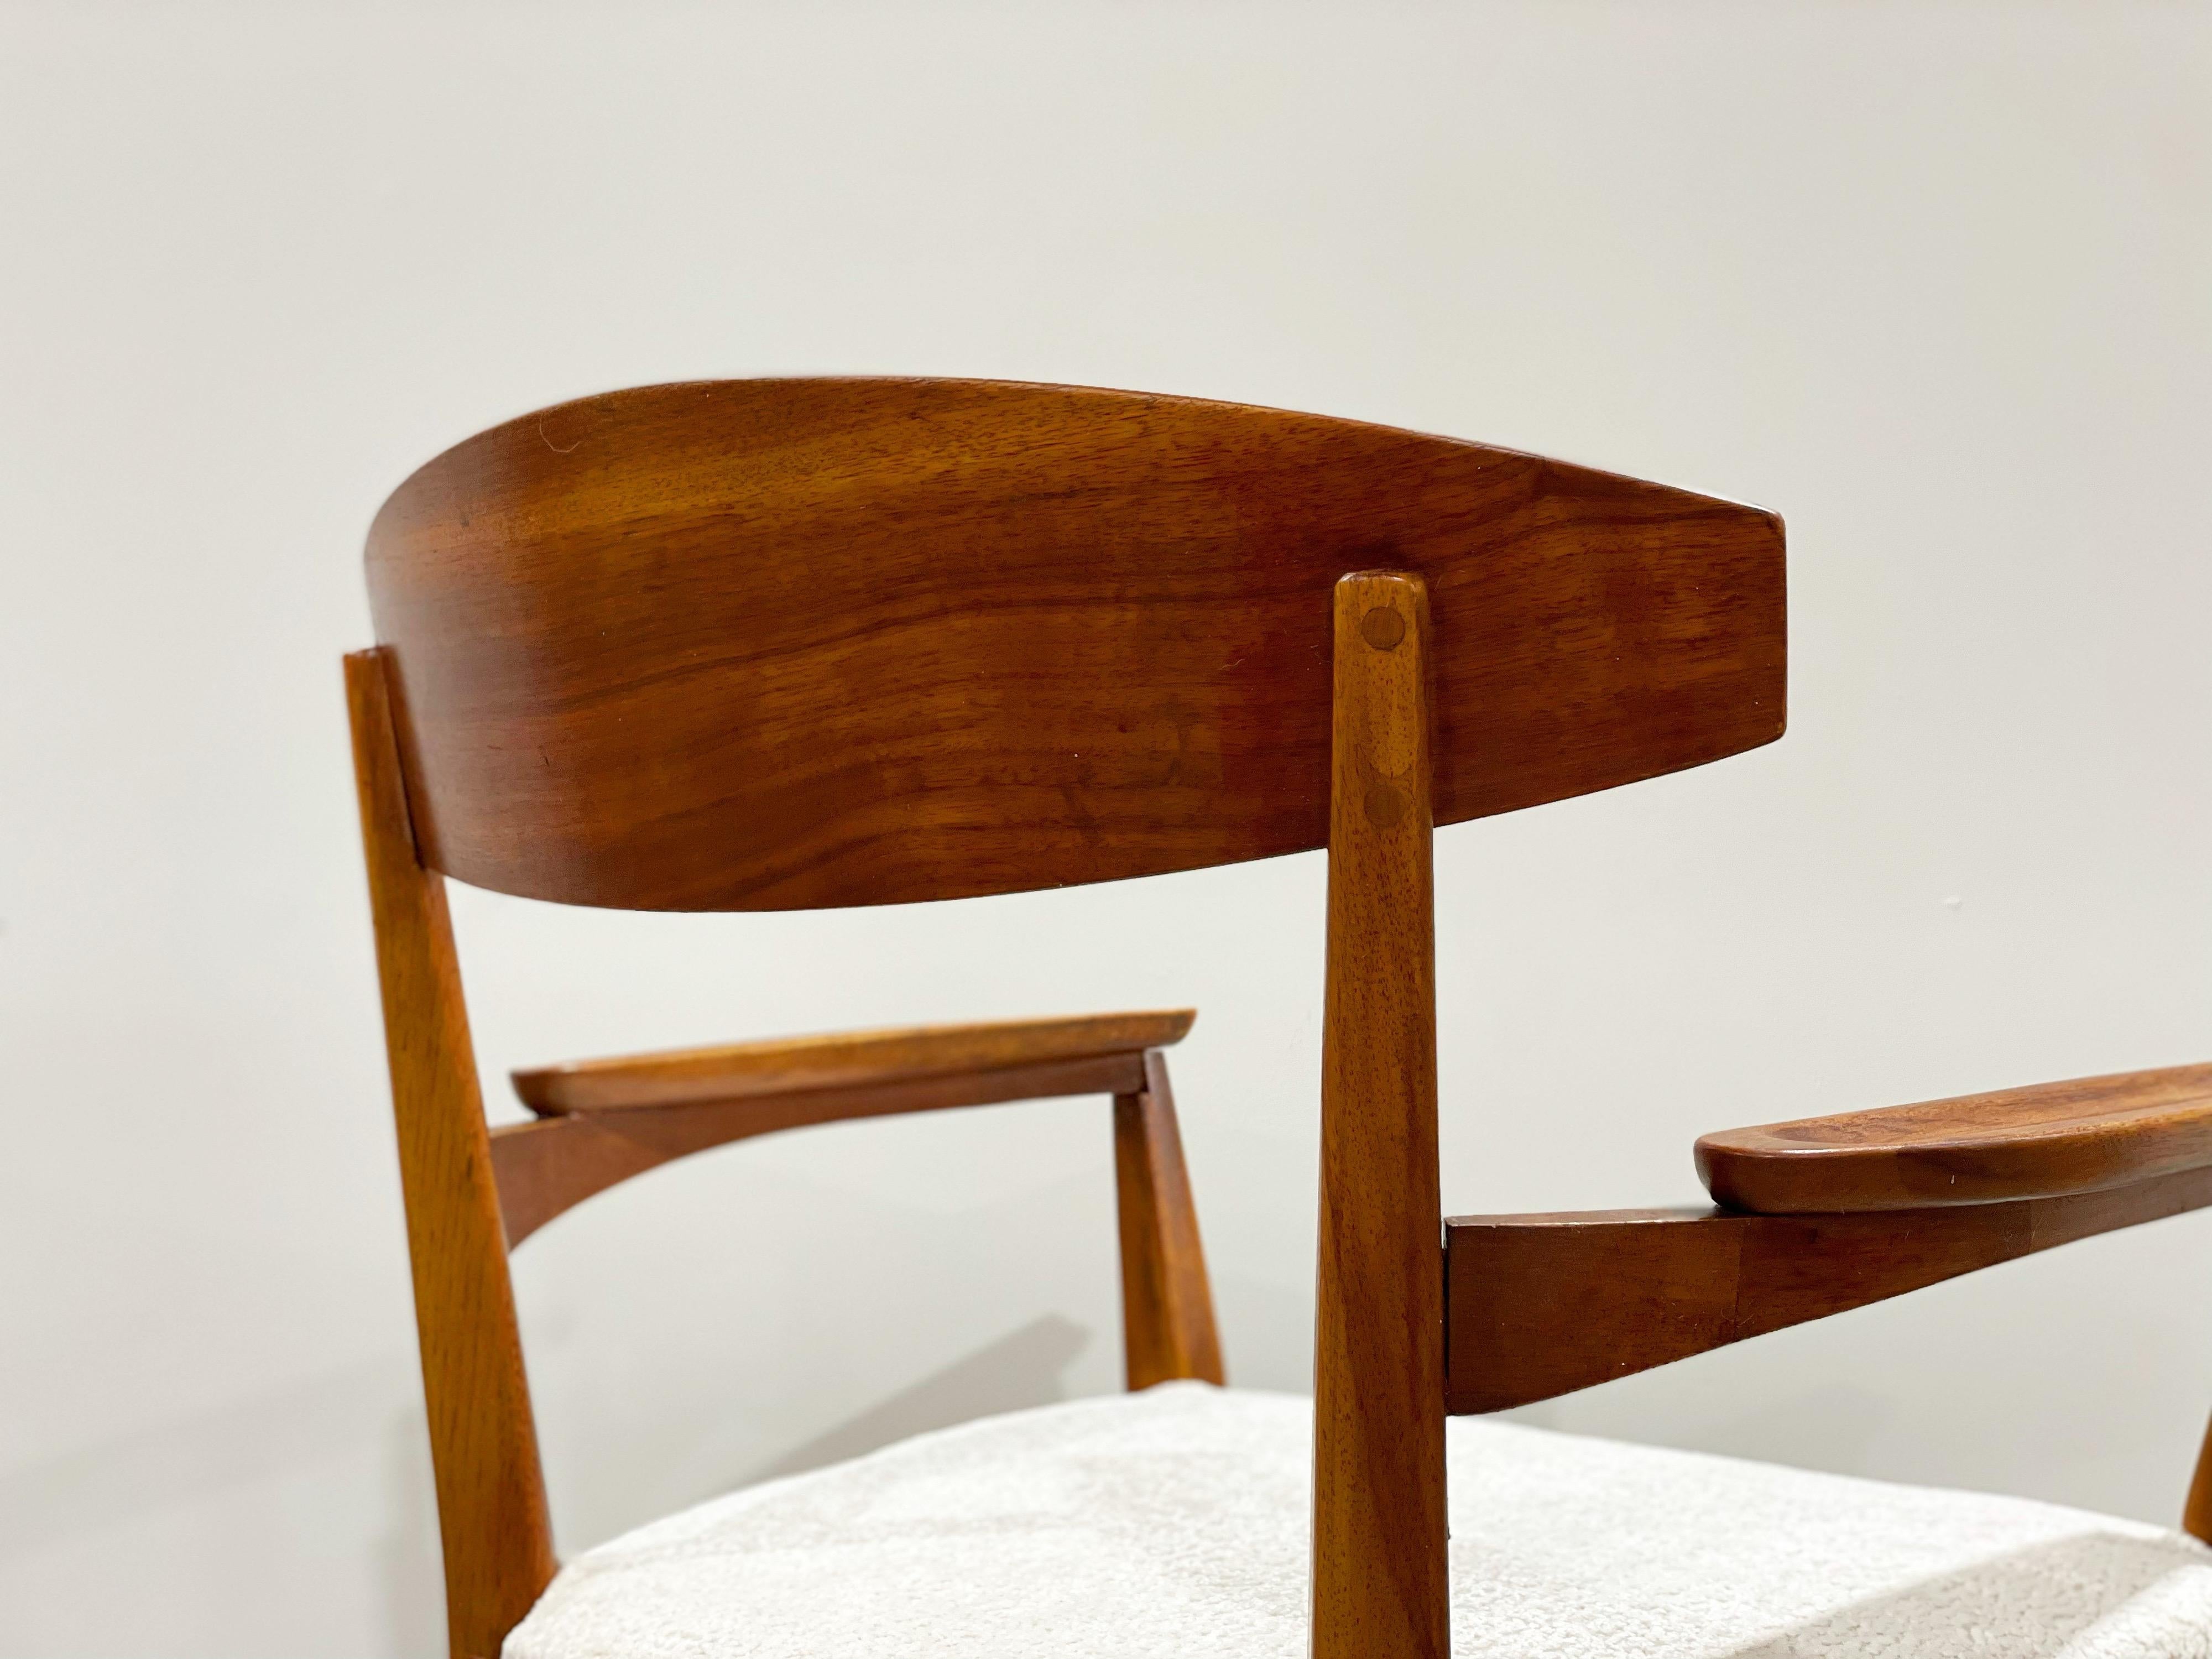 North American Paul McCobb Components, Set of 8 Mid-Century Dining Chairs, Walnut + Rosewood